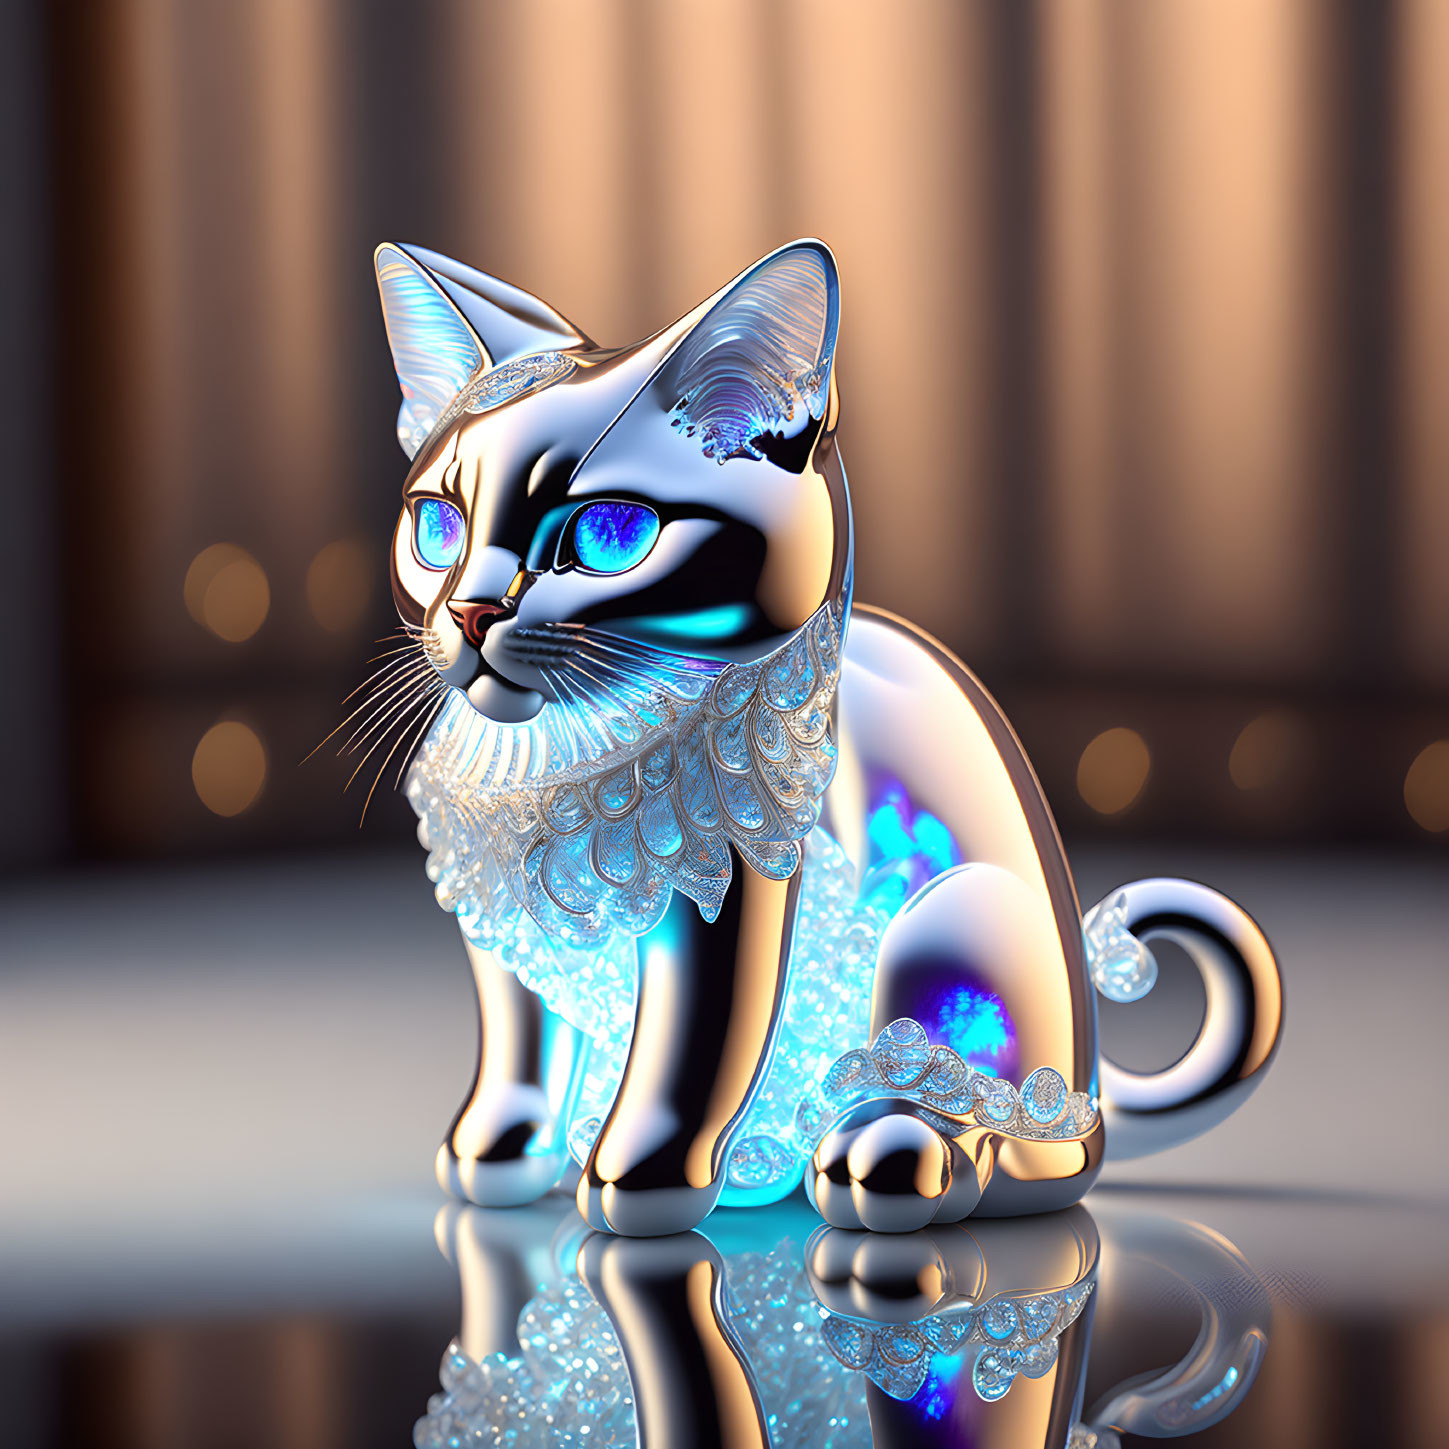 Metallic Cat Figurine with Lace-Like Patterns and Blue Eyes on Reflective Surface